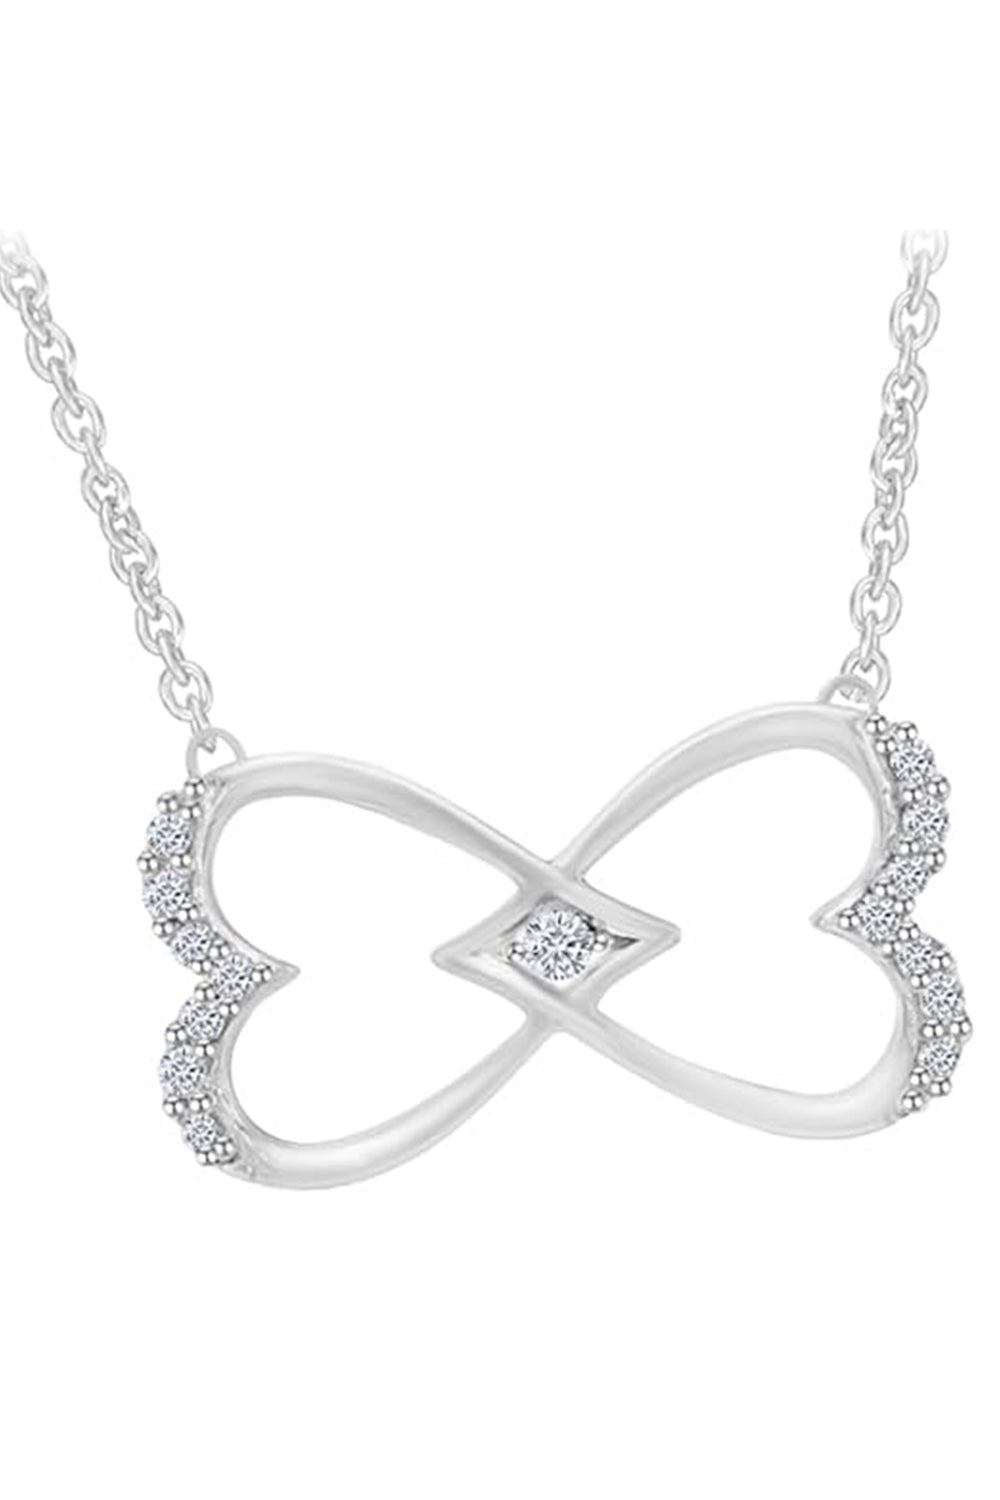 White Gold Color Heart-Shaped Infinity Pendant Necklace